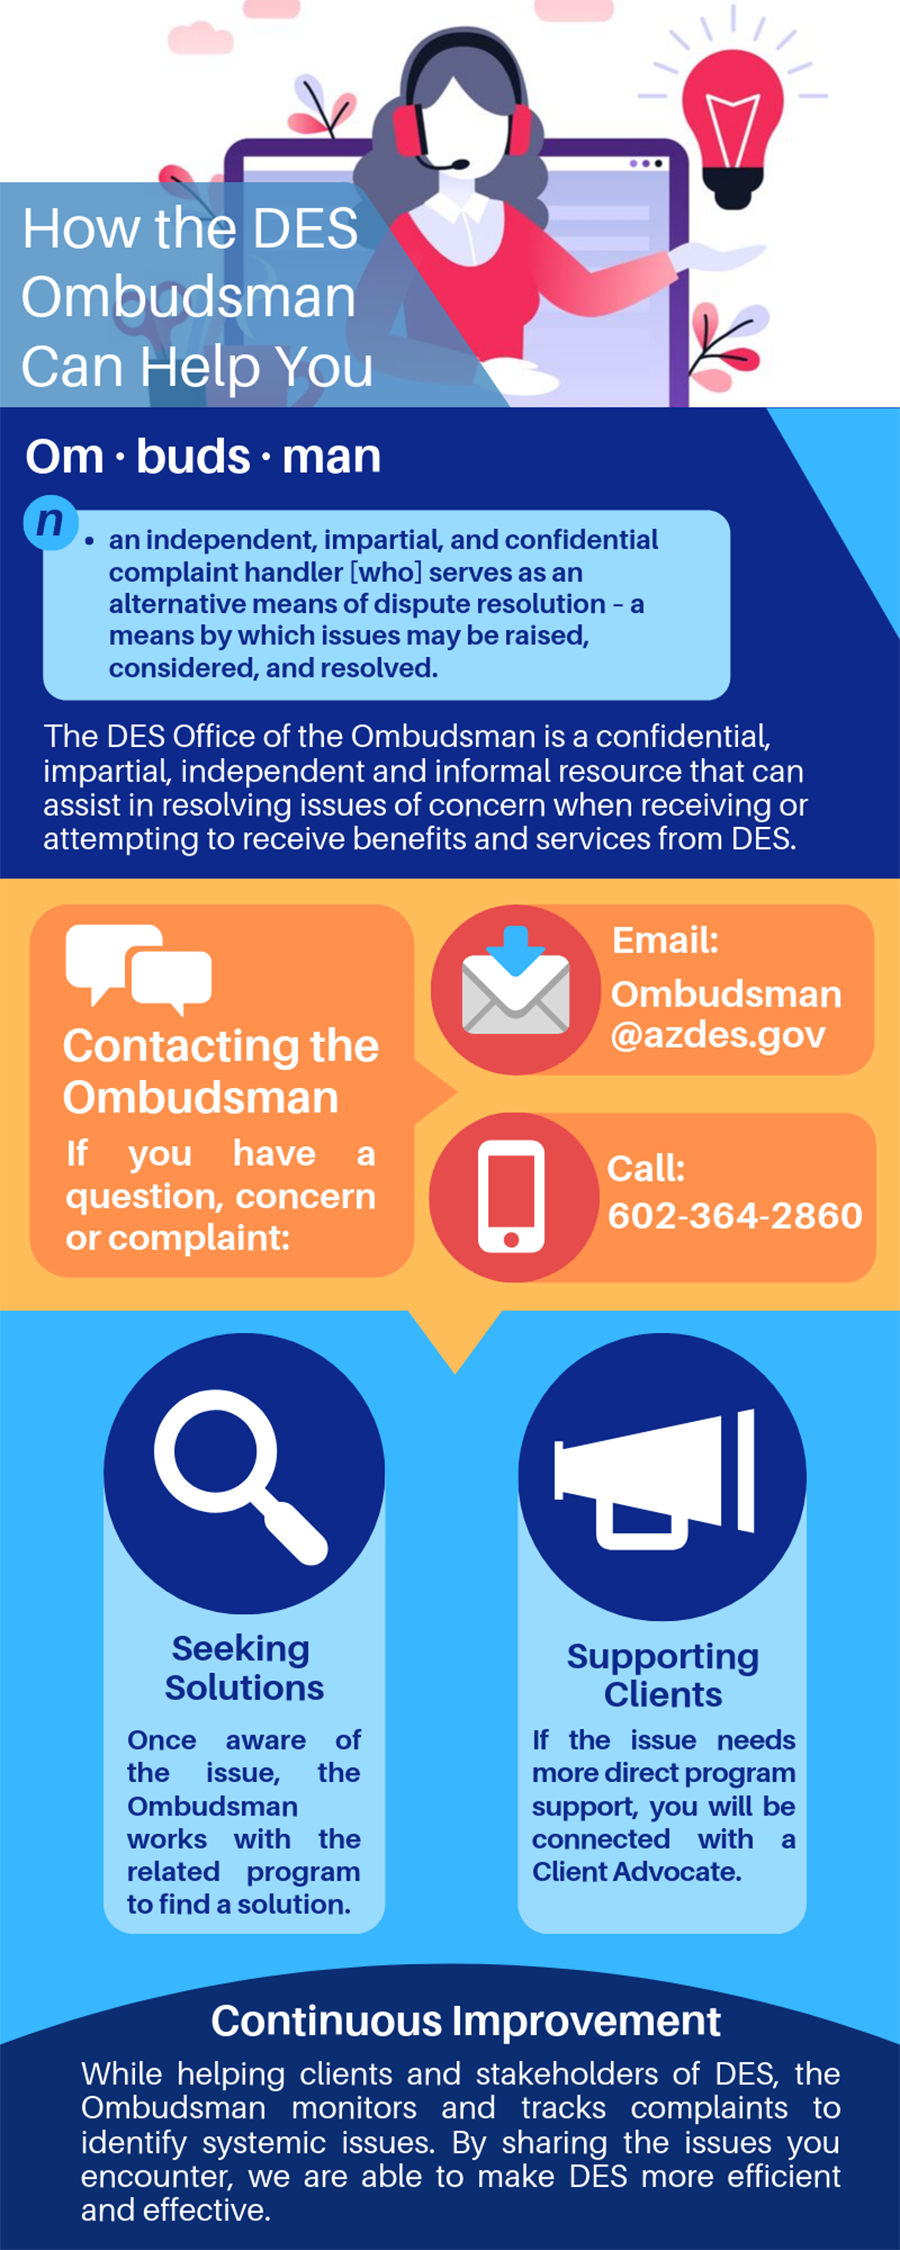 Facts and figures about DES Ombudsman